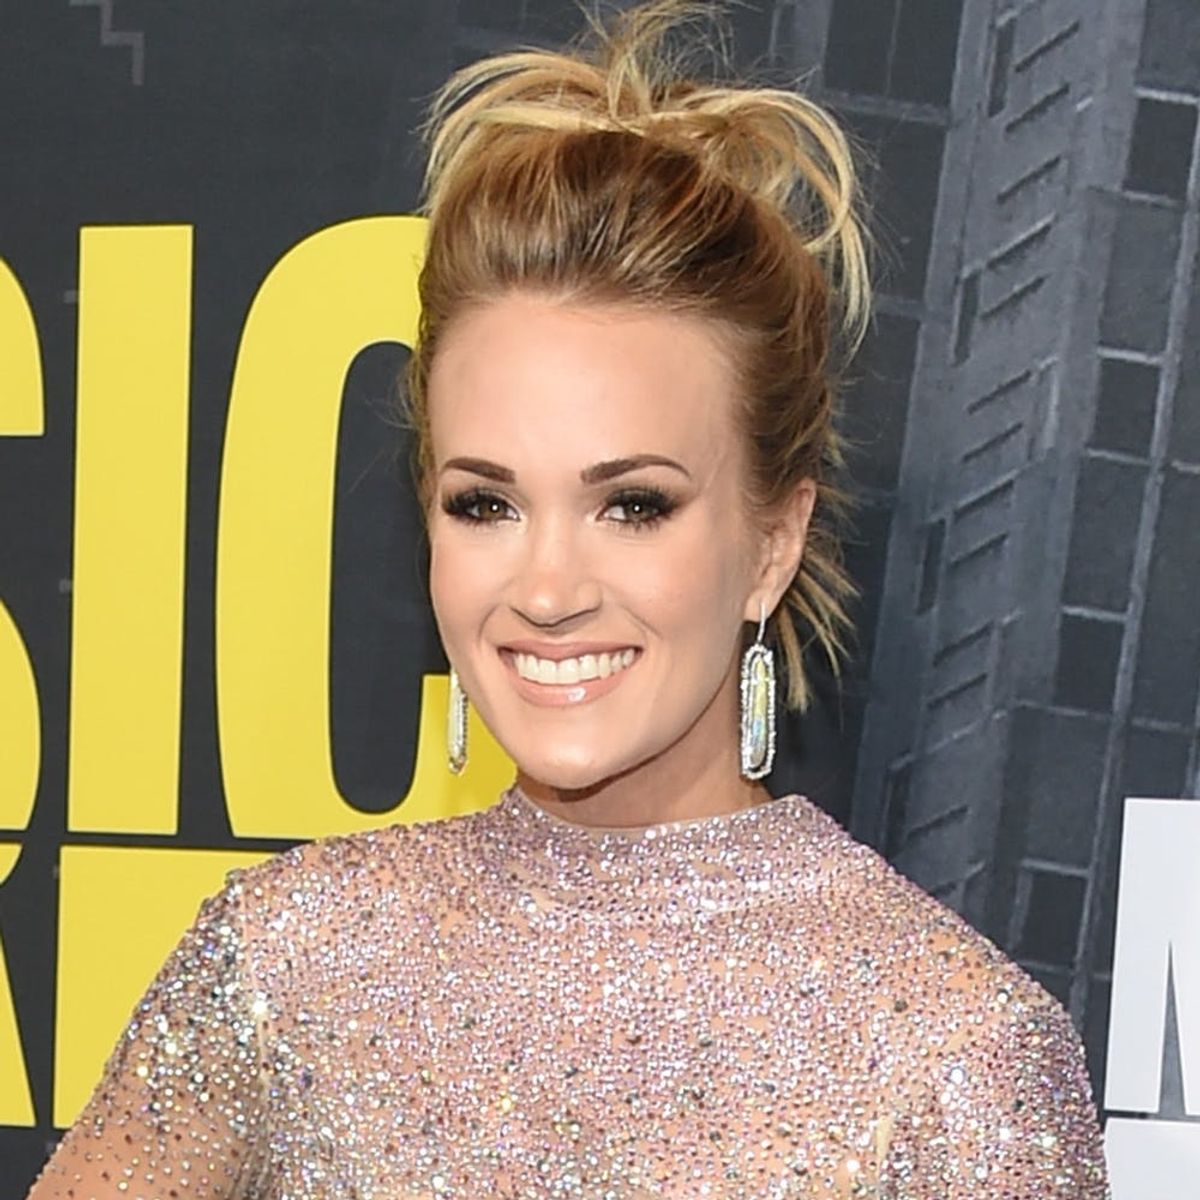 Carrie Underwood Opens Up About Her Face Injury and Recovery